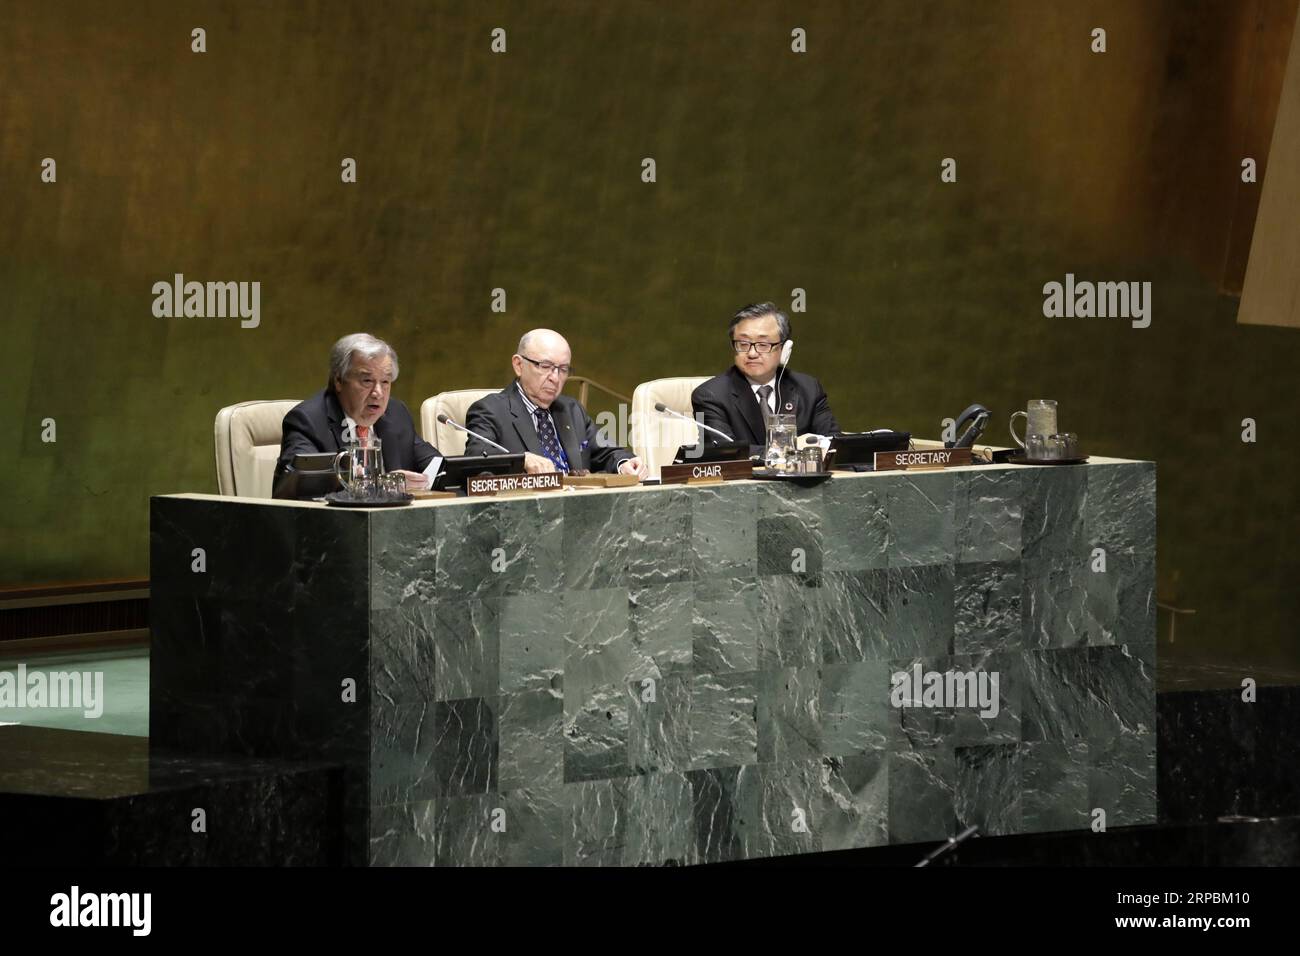 (190611) -- UNITED NATIONS, June 11, 2019 -- UN Secretary-General Antonio Guterres (L) addresses the 12th Session of the Conference of States Parties to the Convention on the Rights of Persons with Disabilities at the UN headquarters in New York, on June 11, 2019. The acting chair of Committee on the Rights of Persons with Disabilities said on Tuesday that due to cash flow difficulties United Nations is facing, sessions of six of the ten UN human rights treaty bodies will be cancelled. ) UN-CONFERENCE-RIGHTS OF PERSONS WITH DISABILITIES LixMuzi PUBLICATIONxNOTxINxCHN Stock Photo